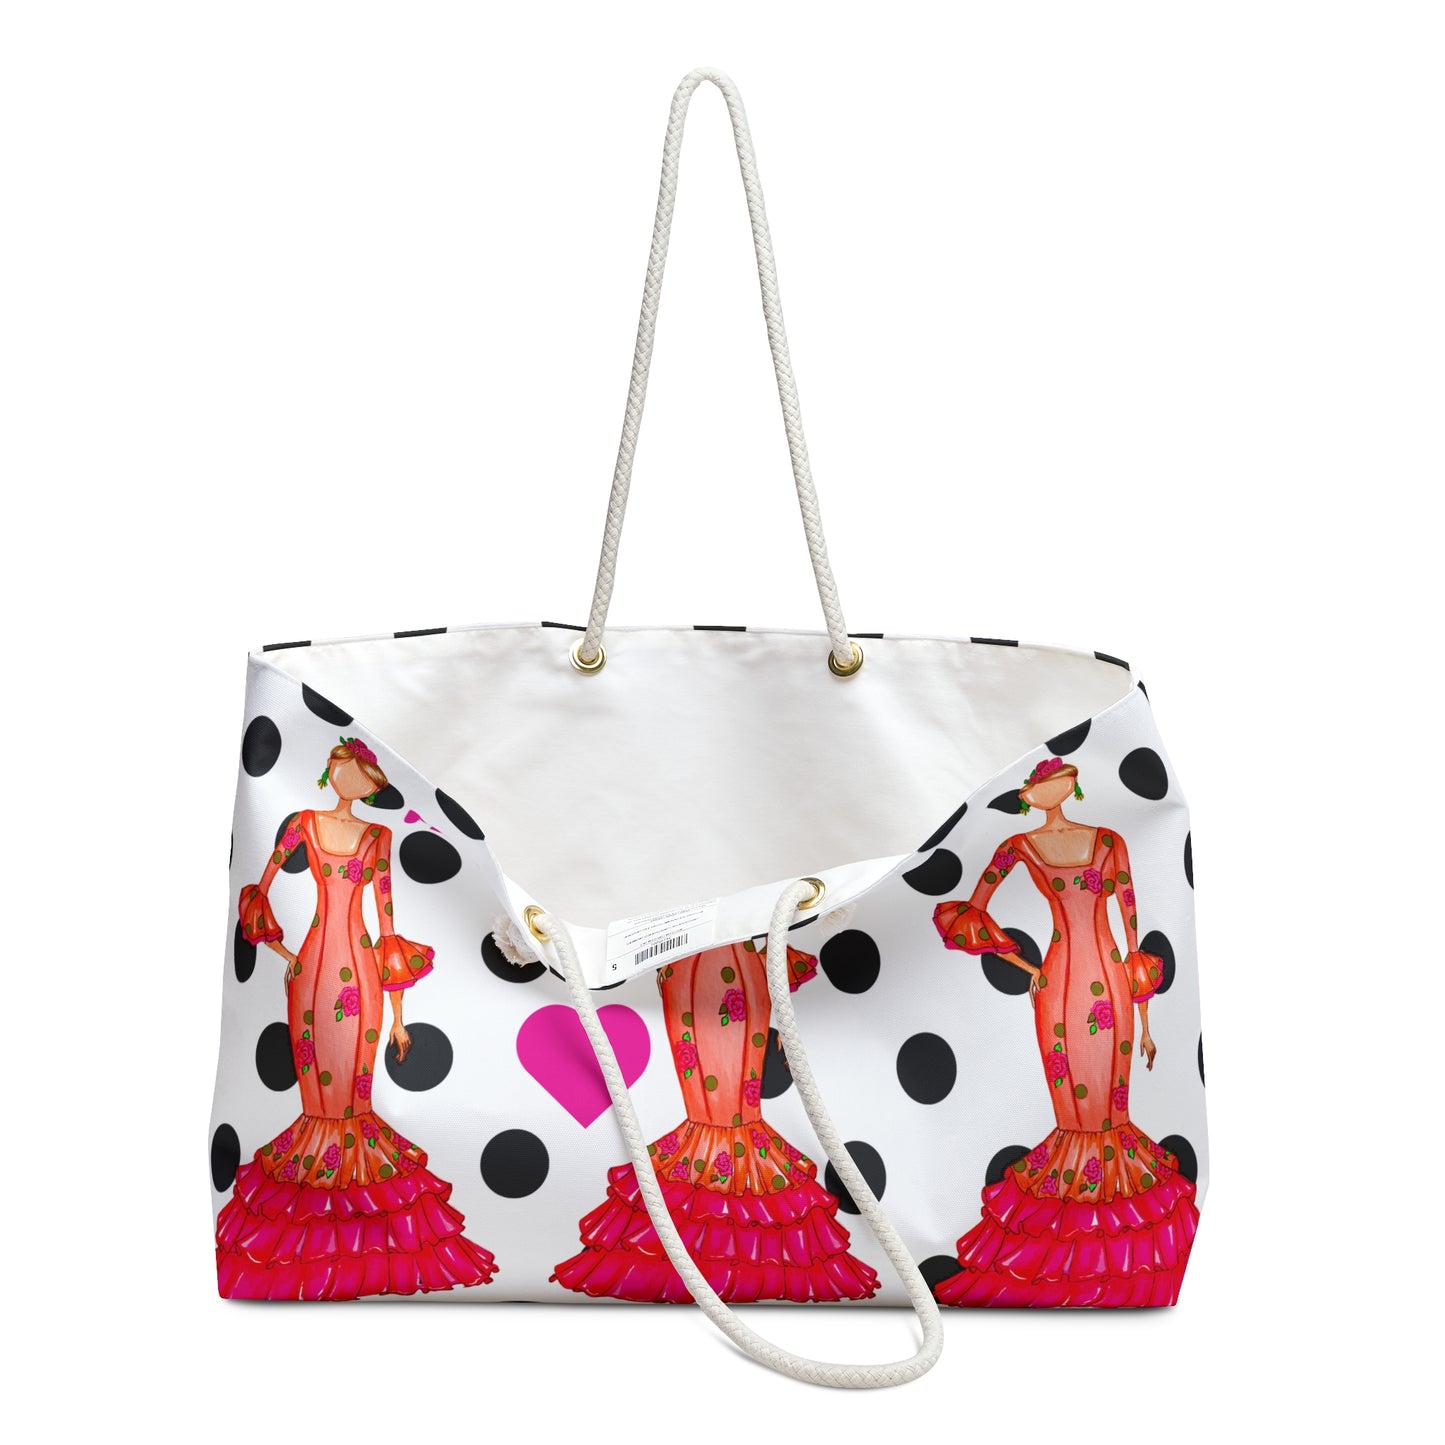 a polka dot purse with a woman in a red dress on it